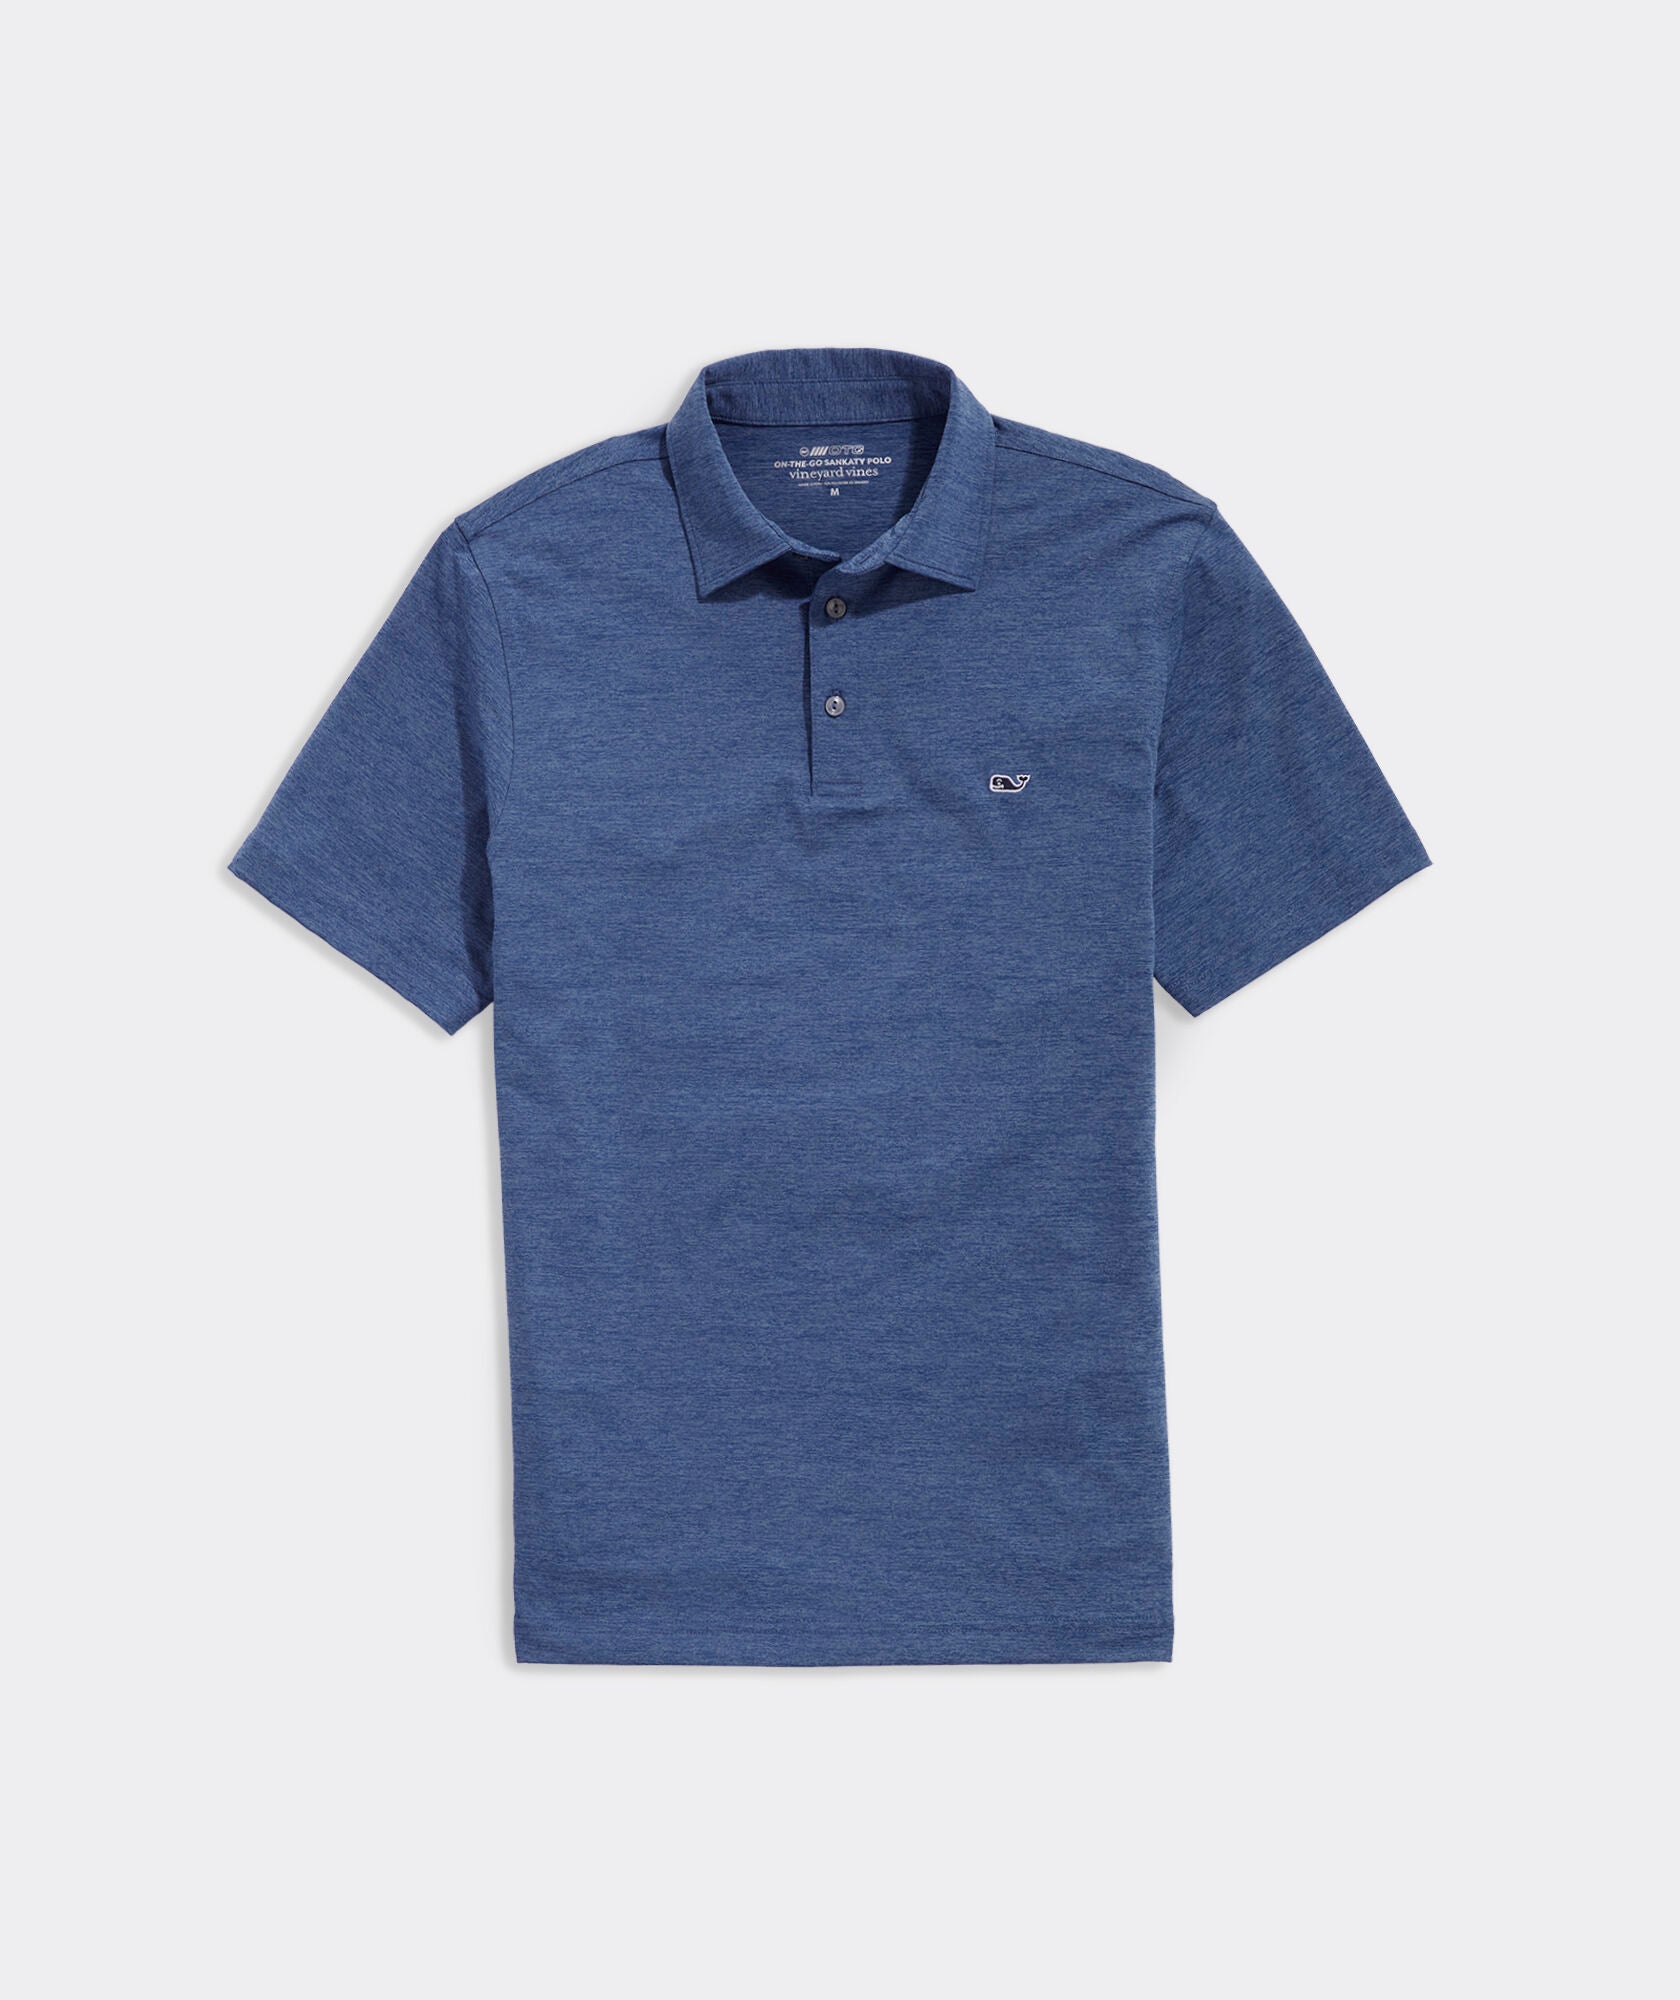 A Vineyard Vines Dunmore Solid Sankaty Polo in the color blue.